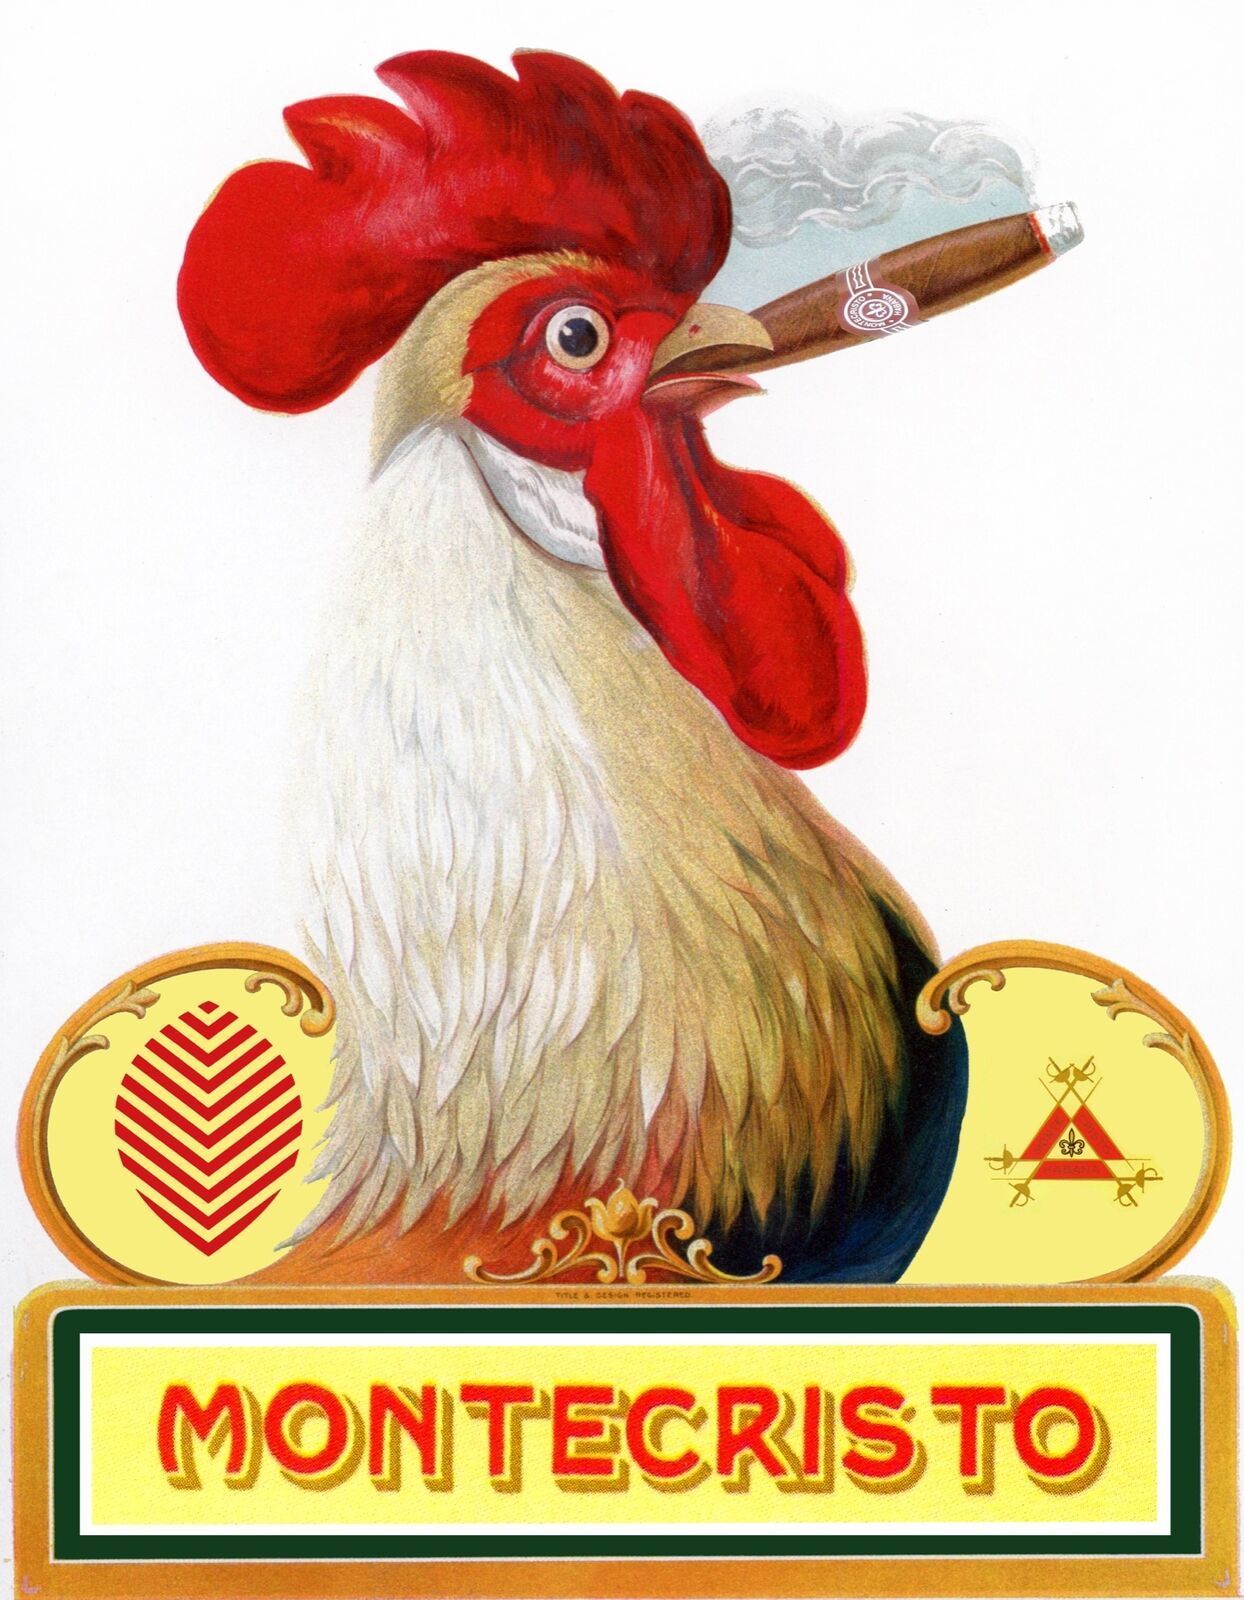 8429.Decoration Poster.Home Room wall art design.Montecristo Rooster smoke cigar